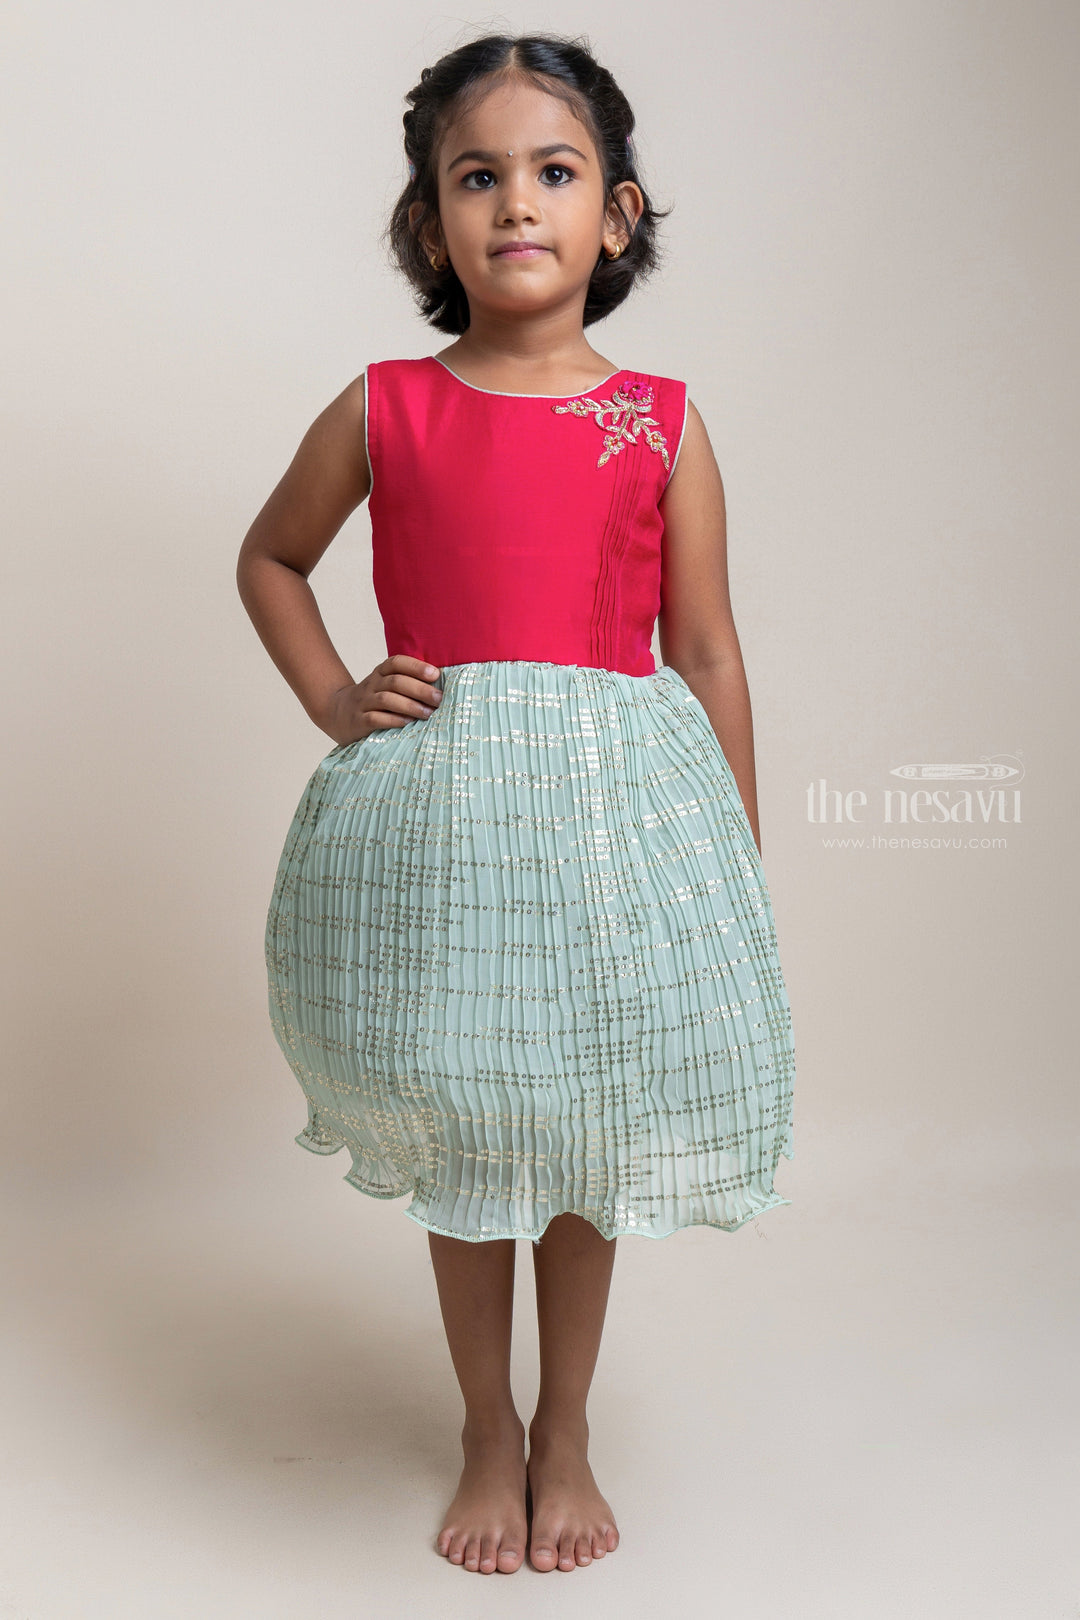 The Nesavu Girls Fancy Party Frock Charming Red And Lurex georgette pleated Sleeveless Party Frock For Girls Nesavu 16 (1Y) / Green / Georgette SF555 Latest Silk Frock Collection For Girls | Premium Pattu Frock | The Nesavu